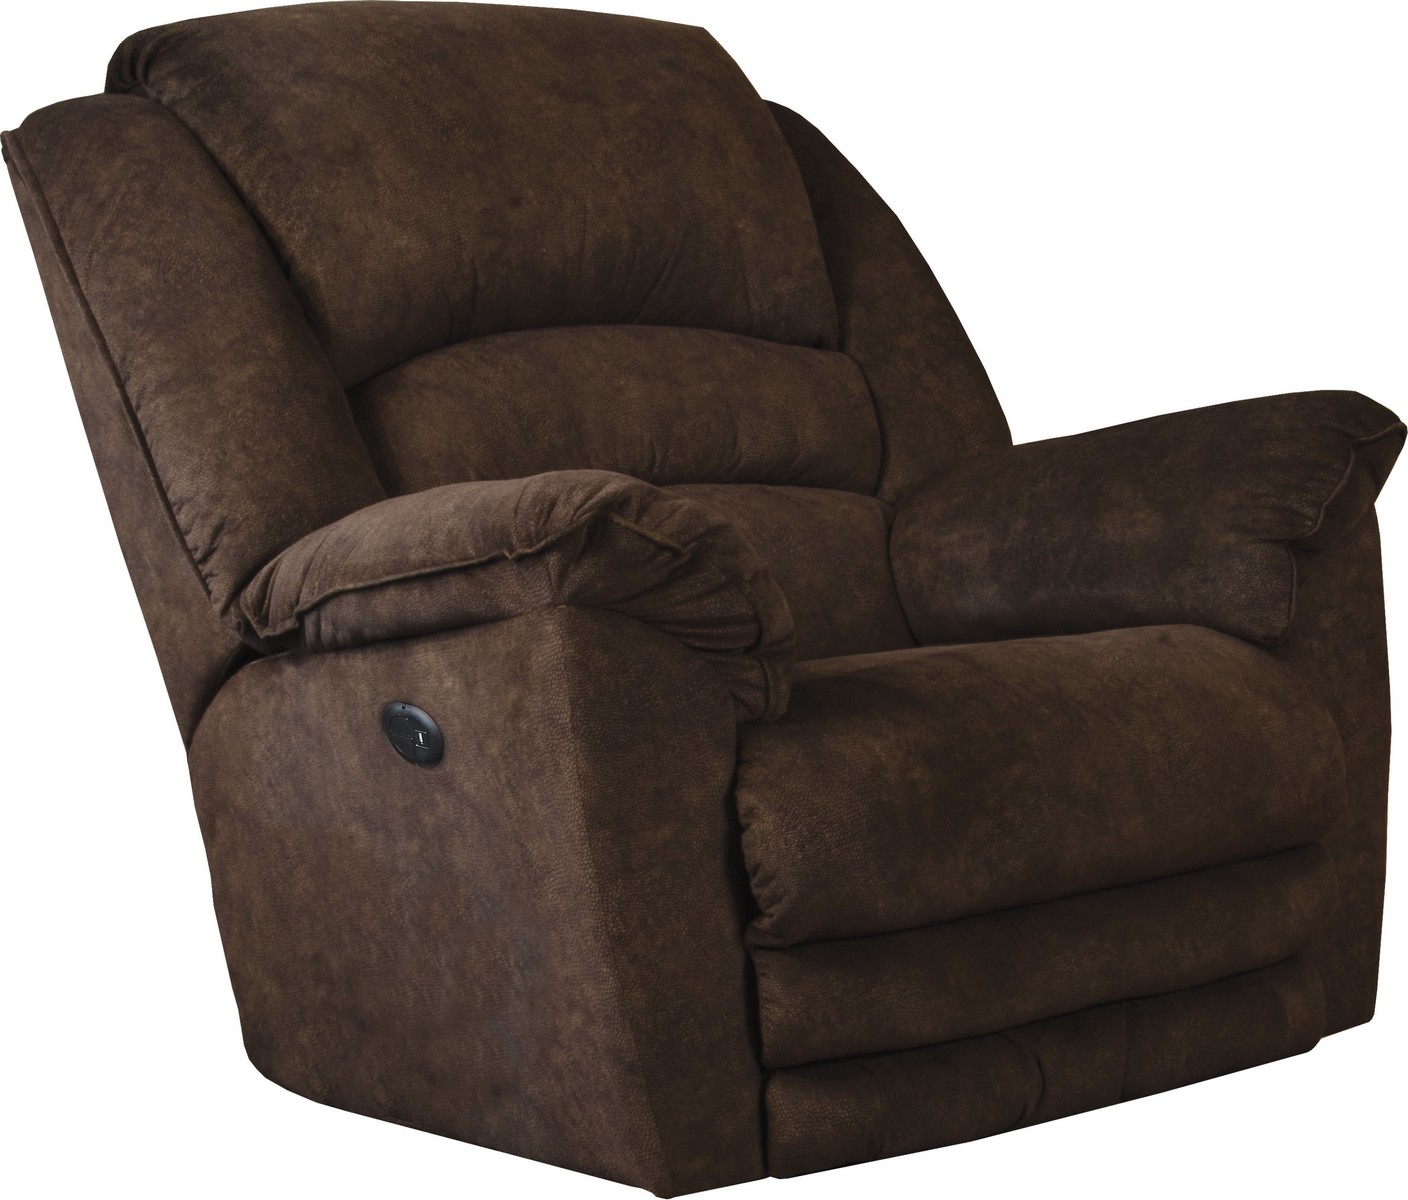 CatNapper Rialto Power Lay Flat Recliner with Extended Ottoman - Chocolate